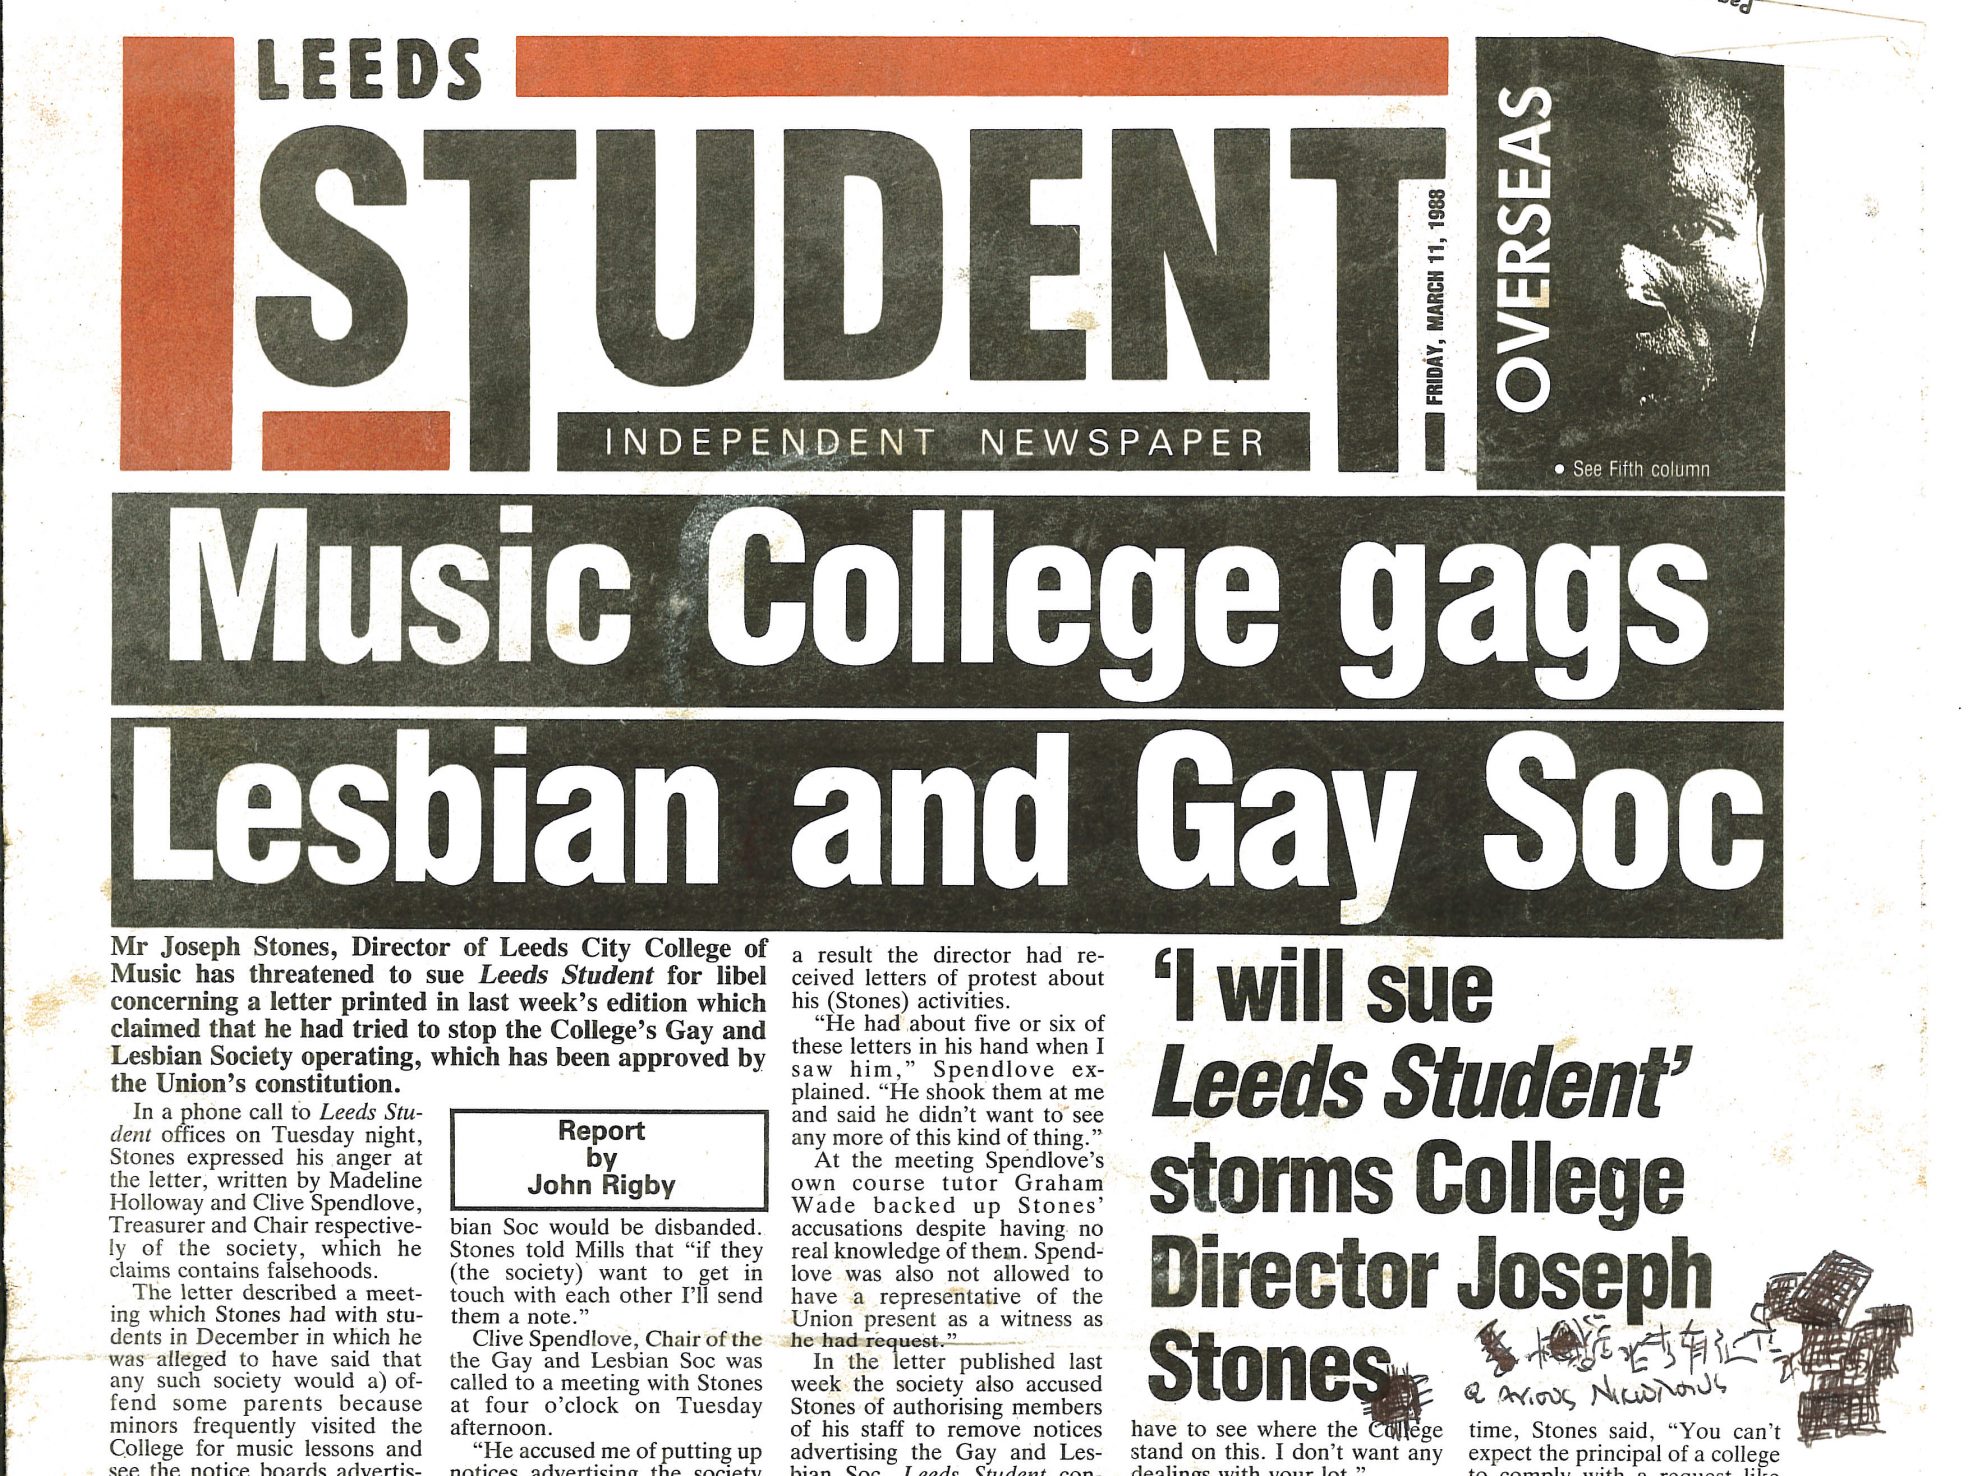 From the Leeds Student, 11 March 1988